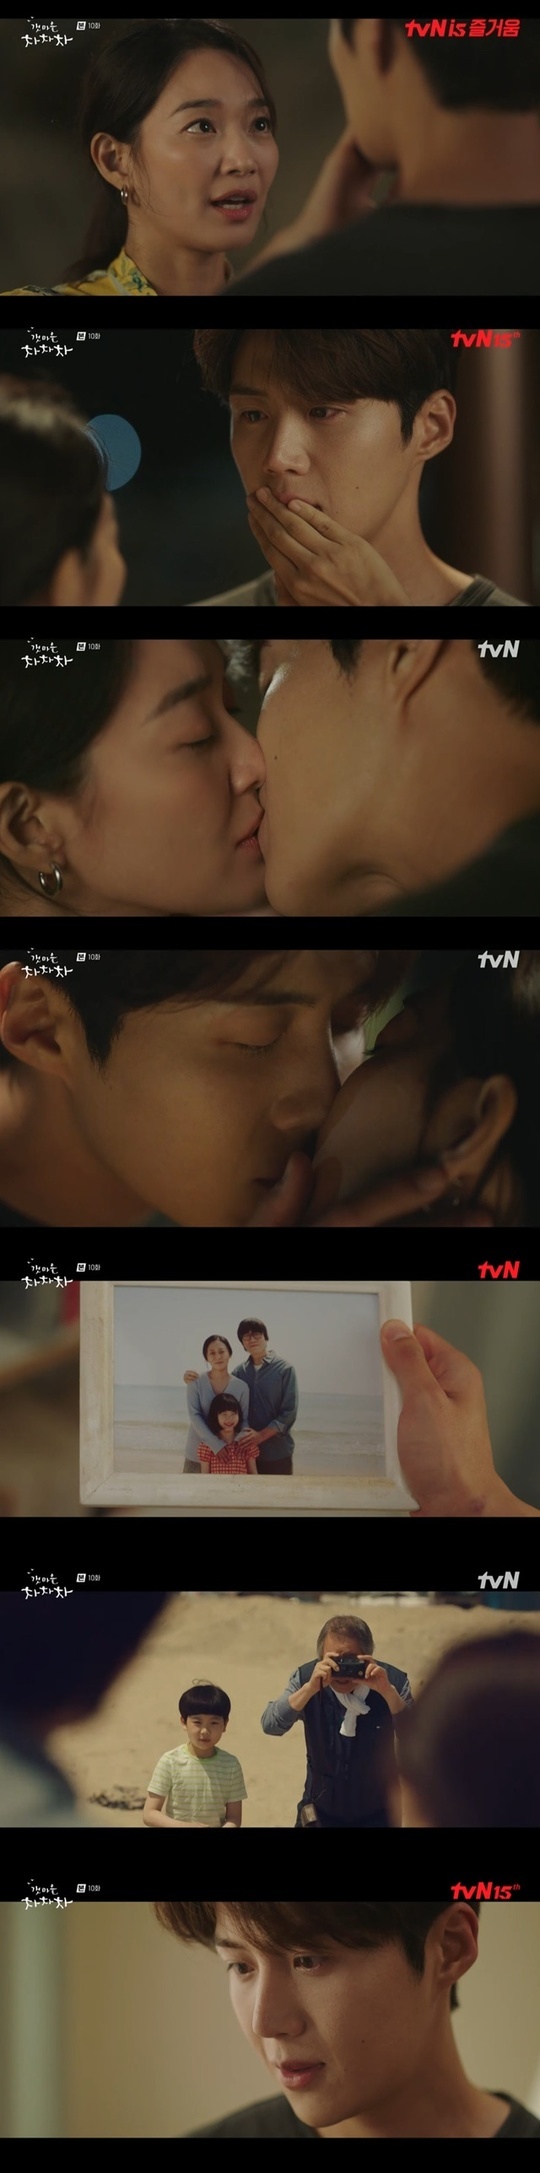 Kim Seon-ho and Shin Min-a confirmed their hearts with a kiss and became lovers.In the 10th episode of TVNs Saturday Drama Gangmae Cha Cha Cha (playplayed by Shin Ha-eun/directed Yoo Jae-won), which was broadcast on September 26, Hong Doo-sik (played by Kim Seon-ho) identified the formerly resonant At the beat, Yoon Hye-jin (Shin Min-a).On the day of the broadcast, Hong Doo-sik was hit by a gunman who broke into the house of Yoon Hye-jin.Yoon Hye-jin was tearful with more concern about Hong Doo-siks wound than the bruises left on my arm, and Ji Sung-hyun (Lee Sang-min) who saw the affection of the two pushed back the Confessions he was trying to do to Yoon Hye-jin.Yoon Hye-jin, who came out of the hospital, was afraid to go back to the house where the gunman broke in, and spent the night together in the living room of Hong Doo-siks house, and Hong Doo-sik confessed his guilt about his grandfathers death.When Hong Doo-sik was playing soccer as a child and did not find his grandfathers heart attack quickly, Yoon Hye-jin comforted Hong Doo-sik, saying, I would have burst my grandfathers costume in the sky.Yoon Hye-jin, who became closer to Hong Doo-sik, was confused when his unrequited love Ji Sung-hyun made love Confessions.The only thing I regret while living is that I did not have Confessions for you 14 years ago, said Ji Sung-hyun, who said, I have become more heartbroken than before.Yoon Hye-jin did not answer Ji Sung-hyuns Confessions and left Seoul outing with his friend, Pyo Mi-sun (Kong Min-jung), in a complex mind.On the way, Yoon Hye-jin asked Hong Doo-sik to pull out the code because he did not remove the code, and Hong Doo-sik entered the room of Yoon Hye-jin and saw a family photo of the resonance At the beat with his mother who died as a child.Yoon Hye-jin was shopping with the top line and eating lobsters, but he was only talking about resonance. He was trying to get rain when it rained and showed a change of 180 degrees from the past.Yoon Hye-jin did not hate to rain anymore because of the memory of rain with Hong Doo Sik.After realizing his mind toward Hong Doo-sik, Yoon Hye-jin gave up Hokang and returned to the resonance.I have something to say today, Mr. Handy, Mr. Hong I like you. I am a planned human being who has a human timetable up to ninety-nine years old.I like you. Mr. Handy, Mr. Hong is the opposite of an individualist who hates crossing lines. But I do not know all that and I am Mr.Handy, I like you, he said, I do not want you to do anything. I feel like Im going to blow up at any time.I cant help it, Confessions said.Hong said, I can not help it anymore, kissing Yoon Hye-jin when he stopped his mouth.In addition to the past, Hong Doo-siks grandfather expressed his wish that If our doo-sik is left alone later, send a good person to the side so that he will not be lonely without me. In addition, Hong Doo-sik recognized the family photo of Yoon Hye-jin and said, Then was the child dental?